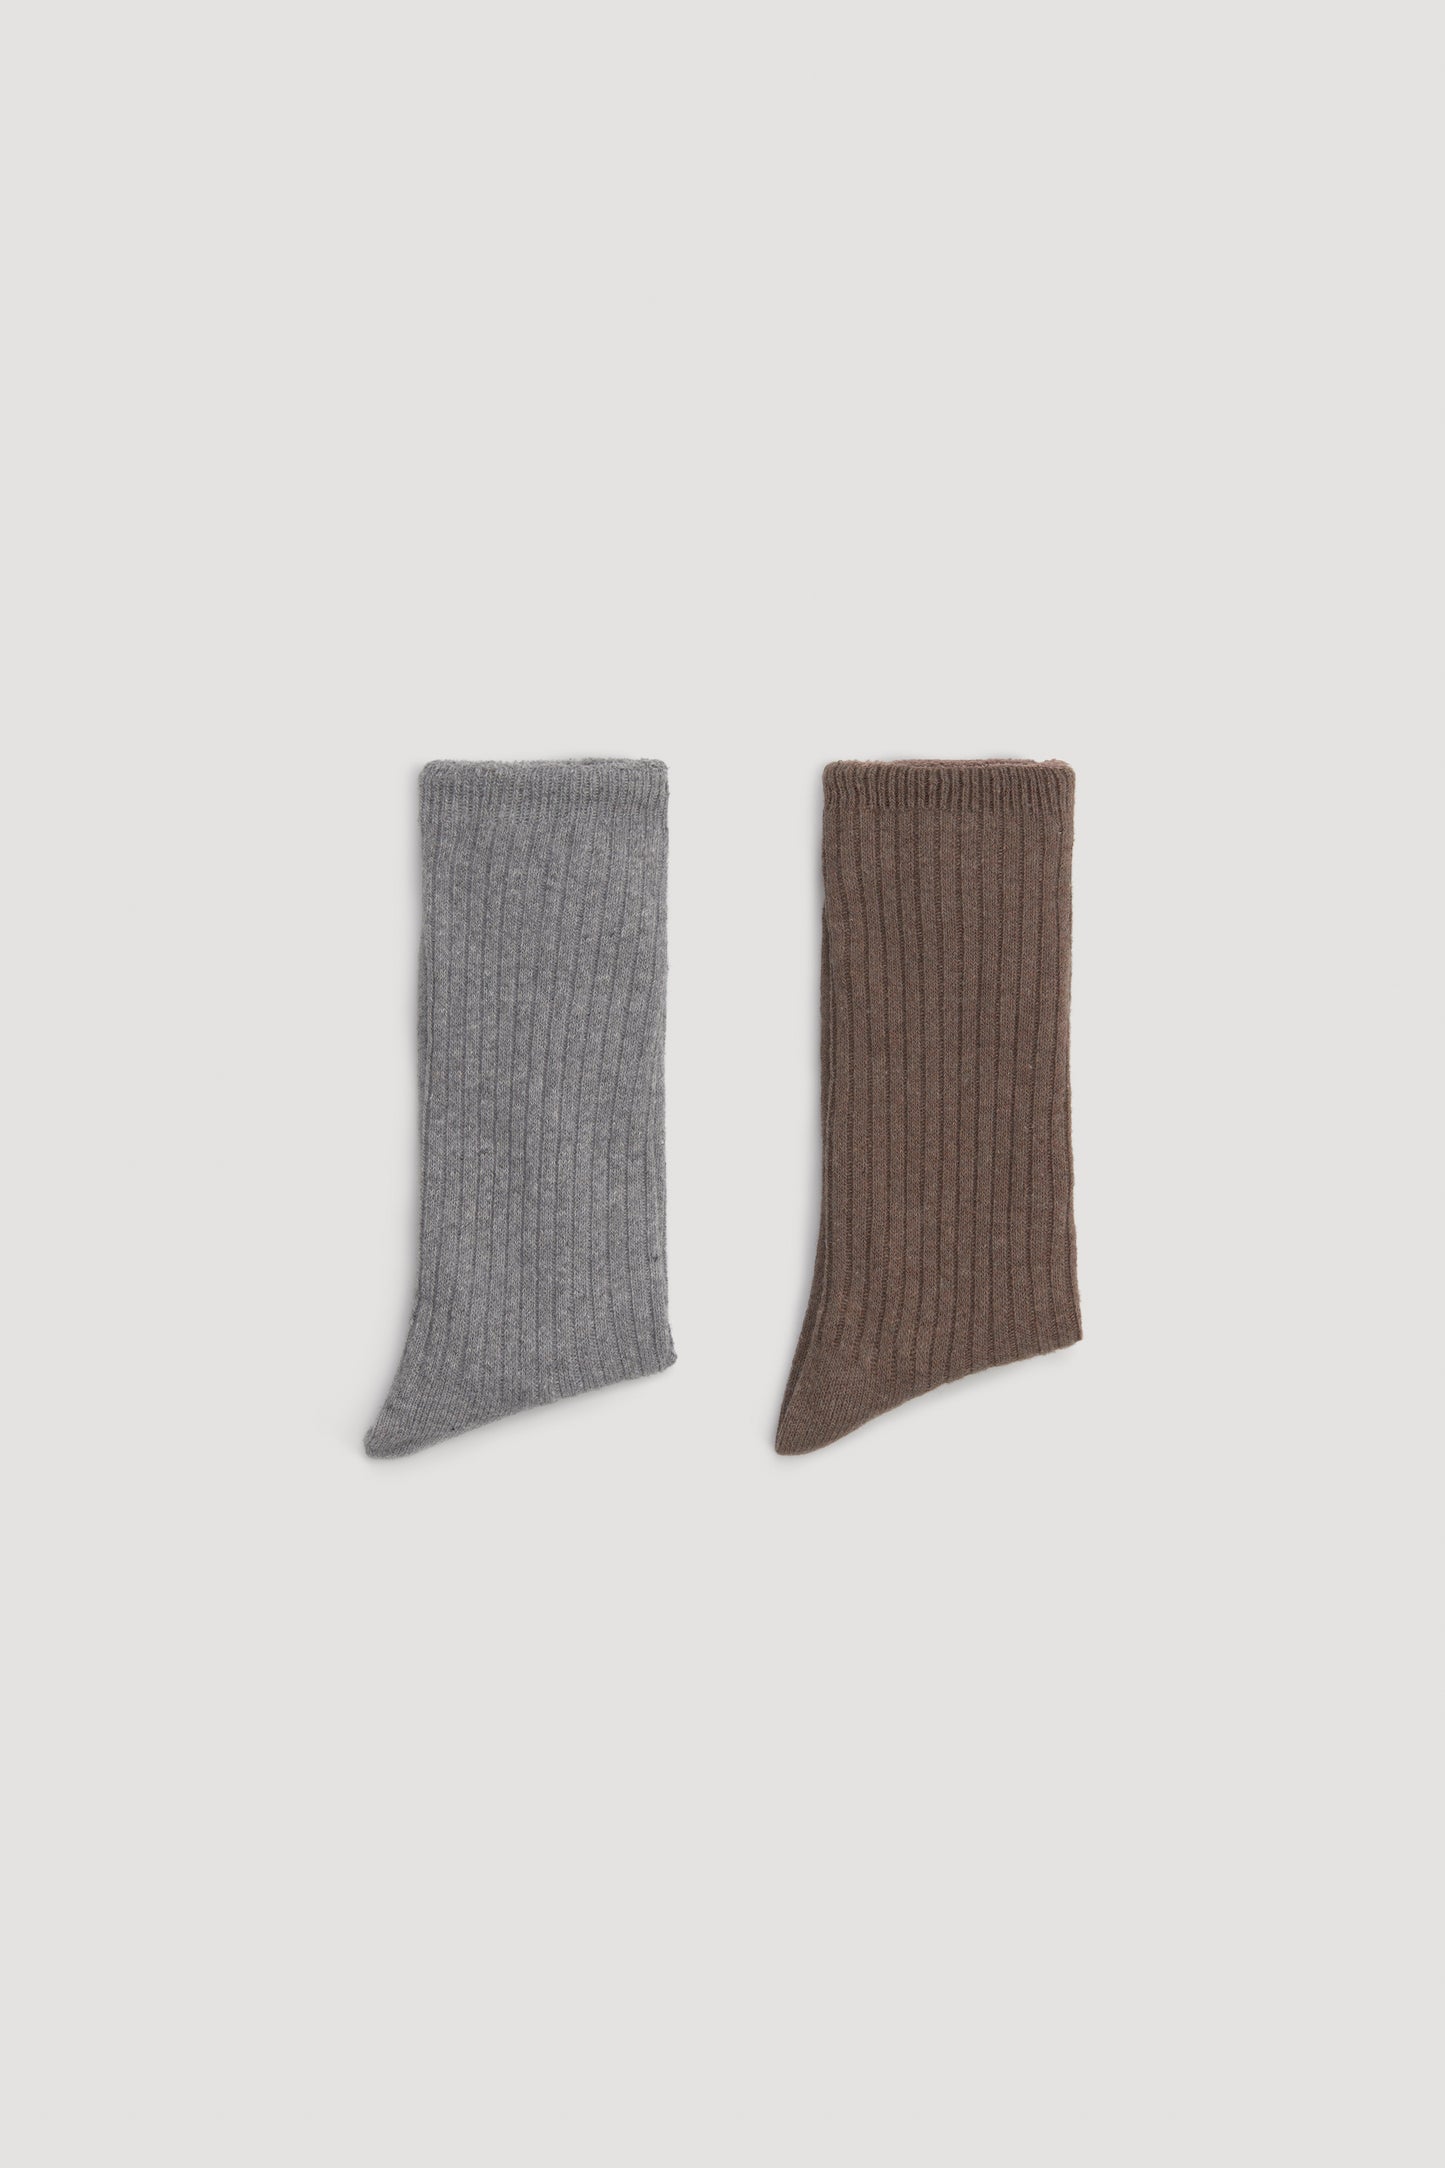 Ysabel Mora Double Sock - Light brown and grey soft and warm fleece lined knitted ribbed socks with soft top cuff.